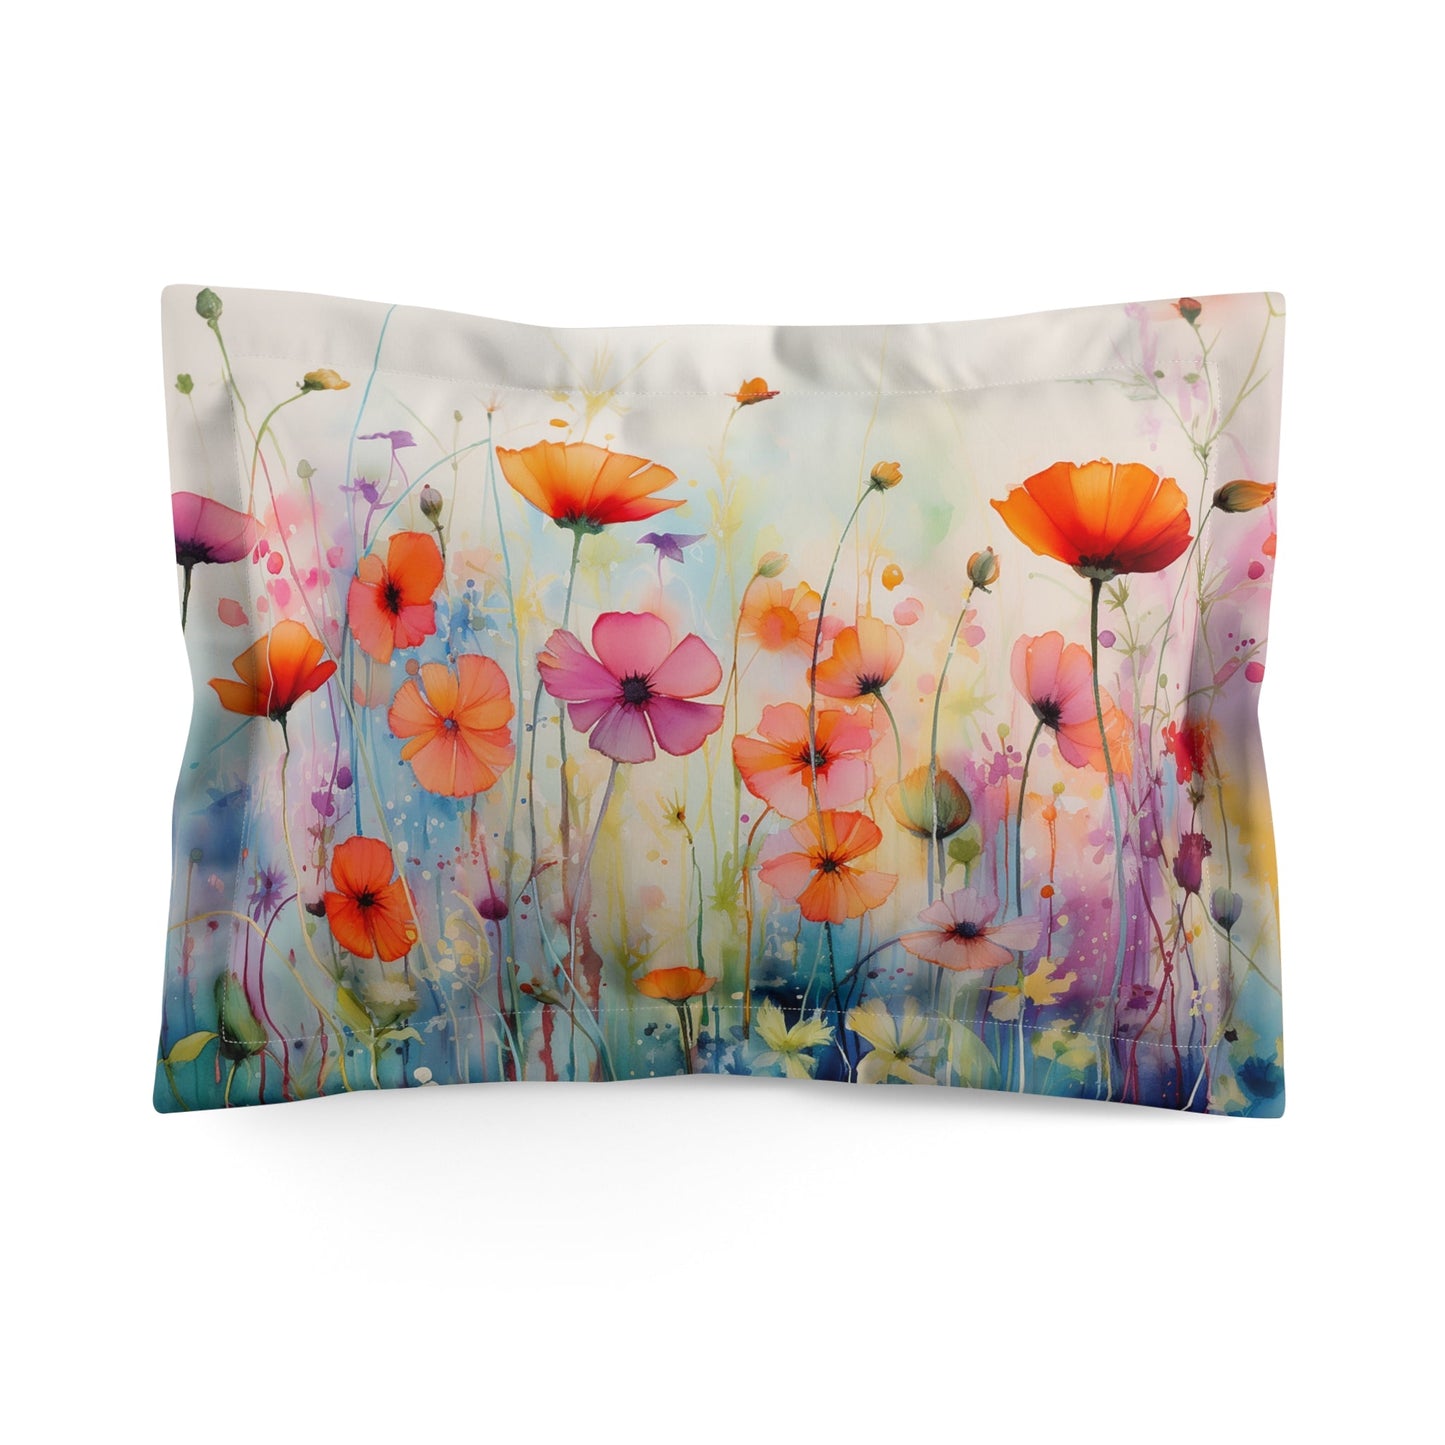 Wildflower Poppies Pillow Sham, Watercolor Art Colorful Accent - FlooredByArt